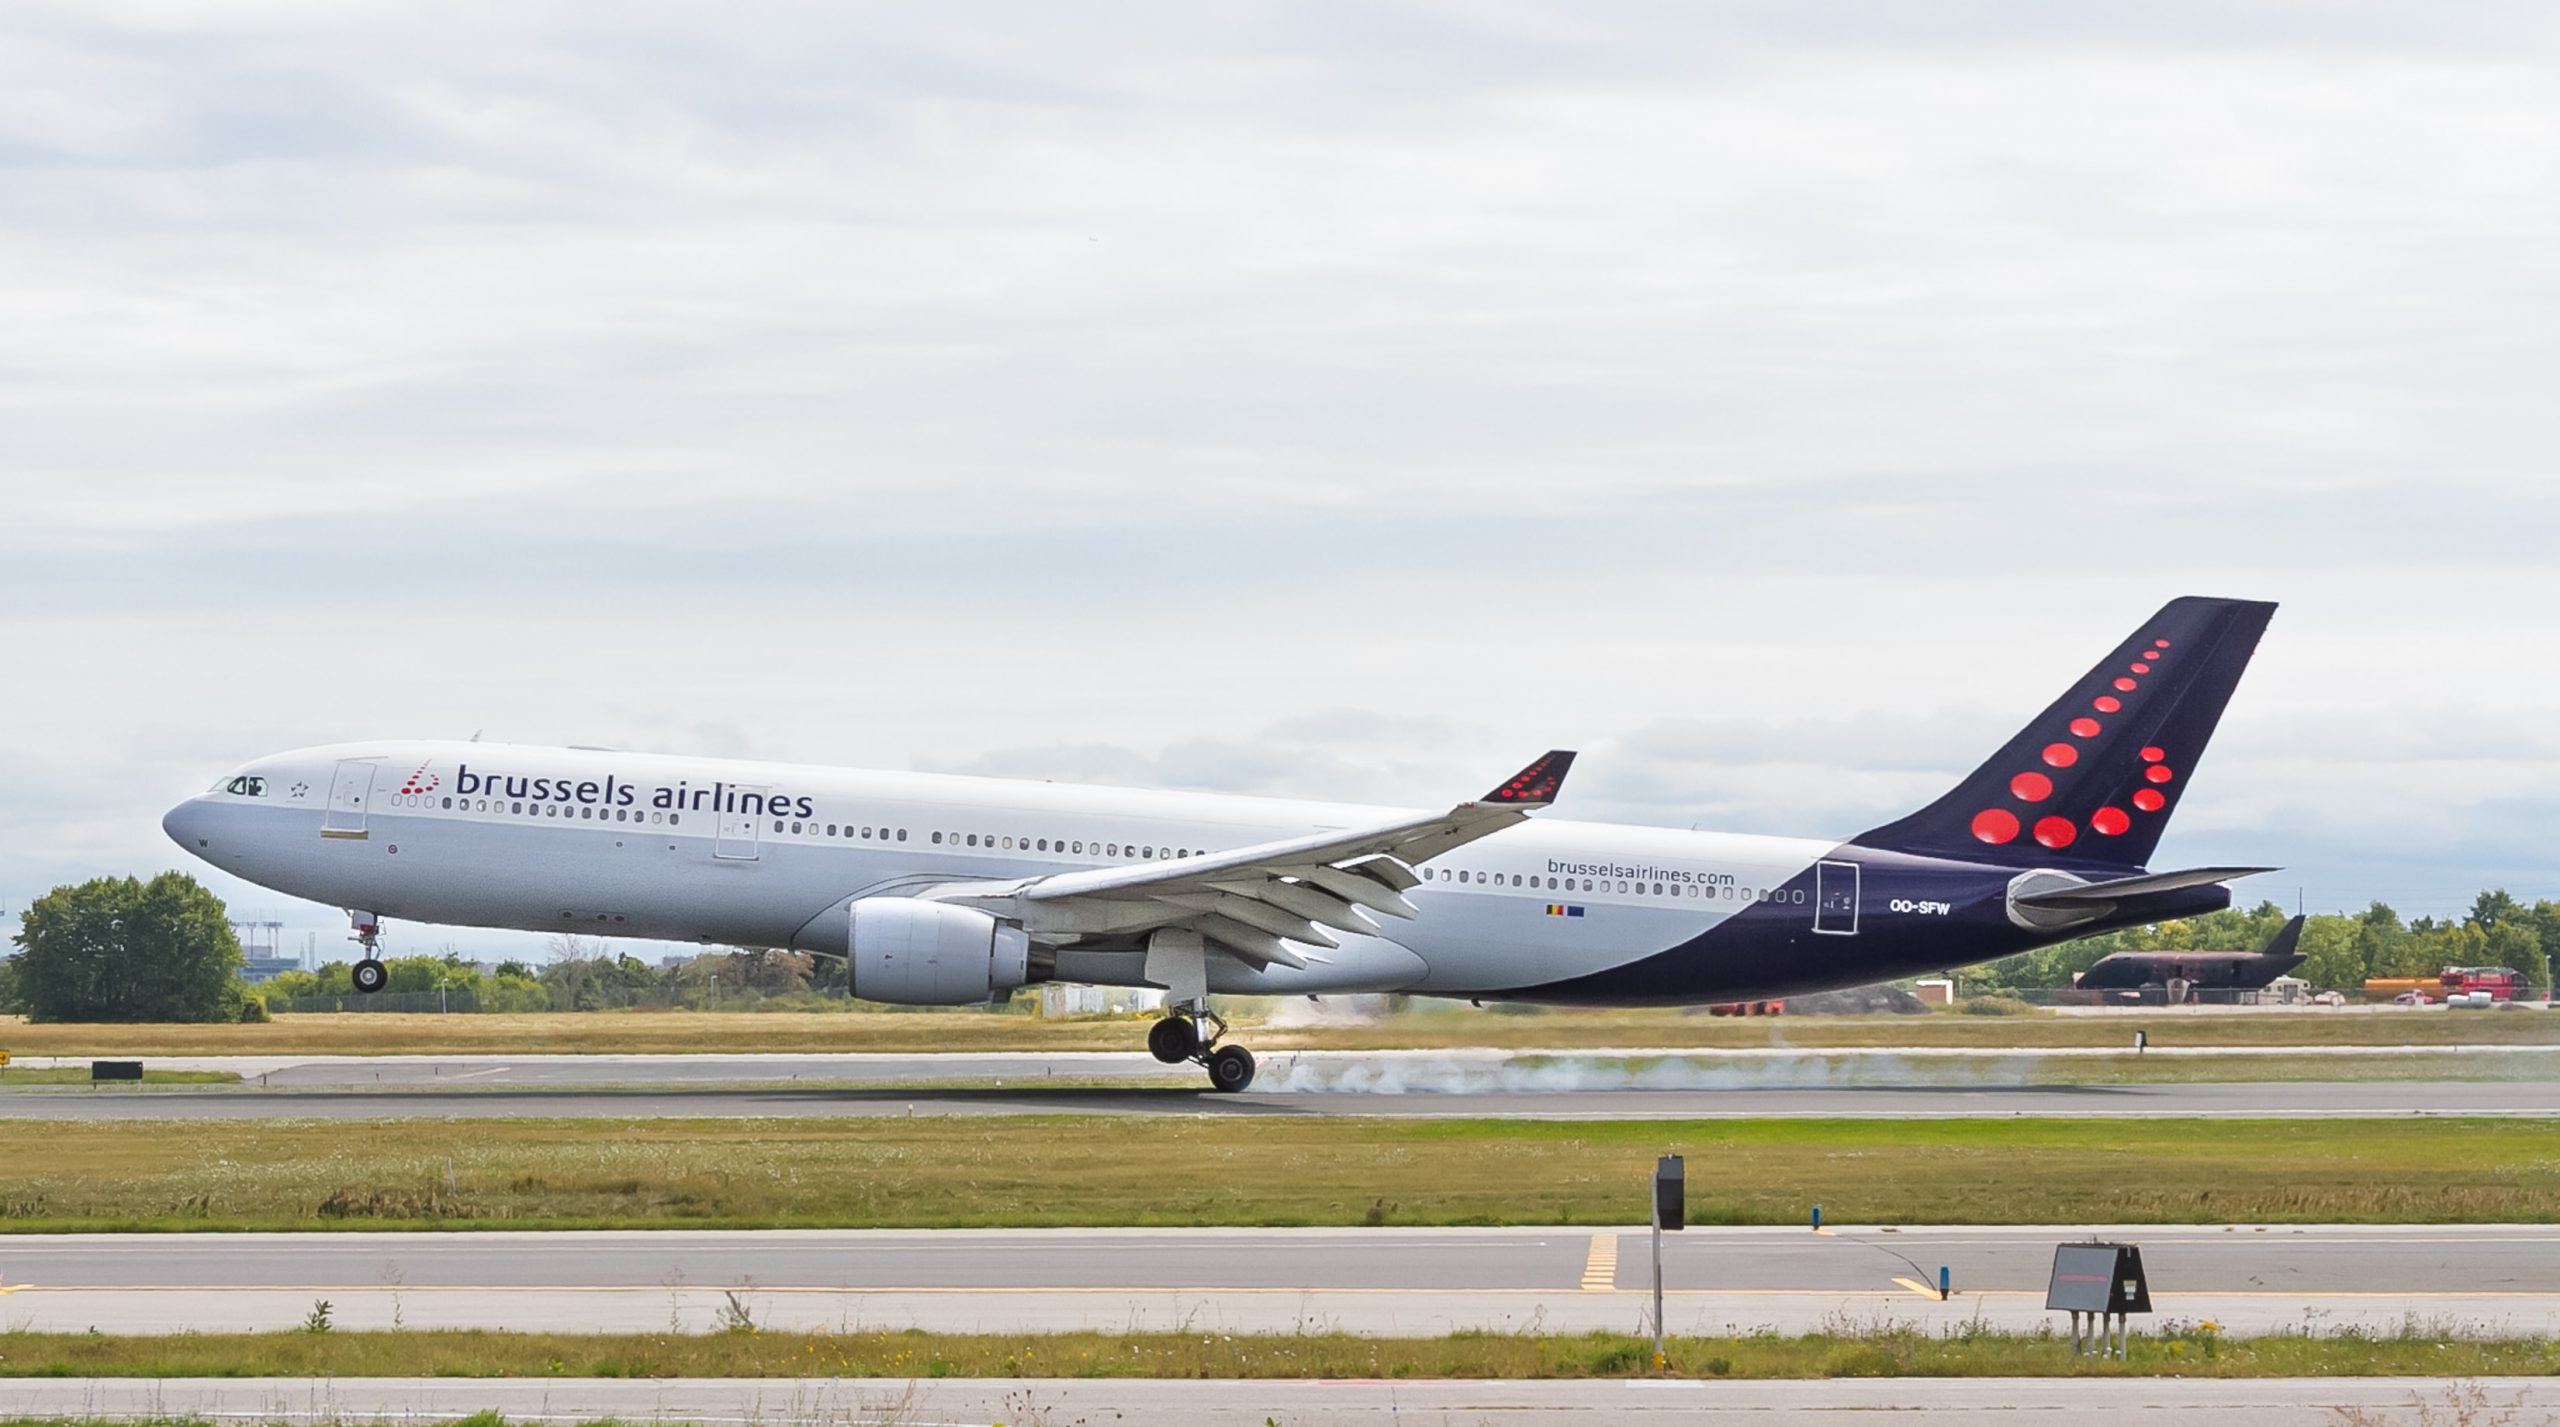 Managed Services & System Integration at Brussels Airlines